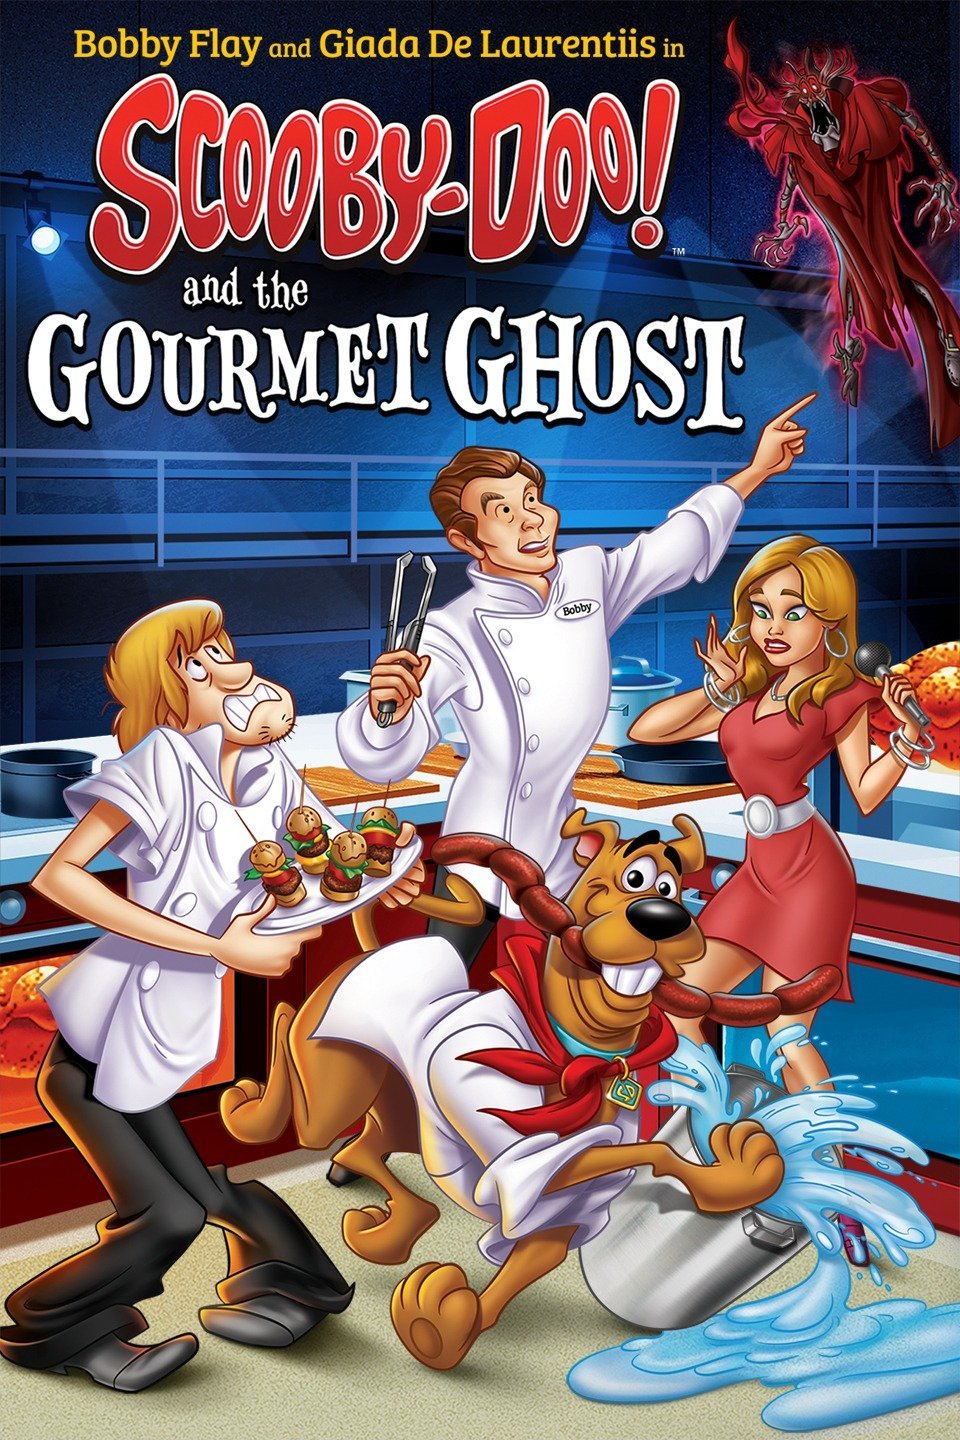 L'affiche du film Scooby-Doo! and the Gourmet Ghost